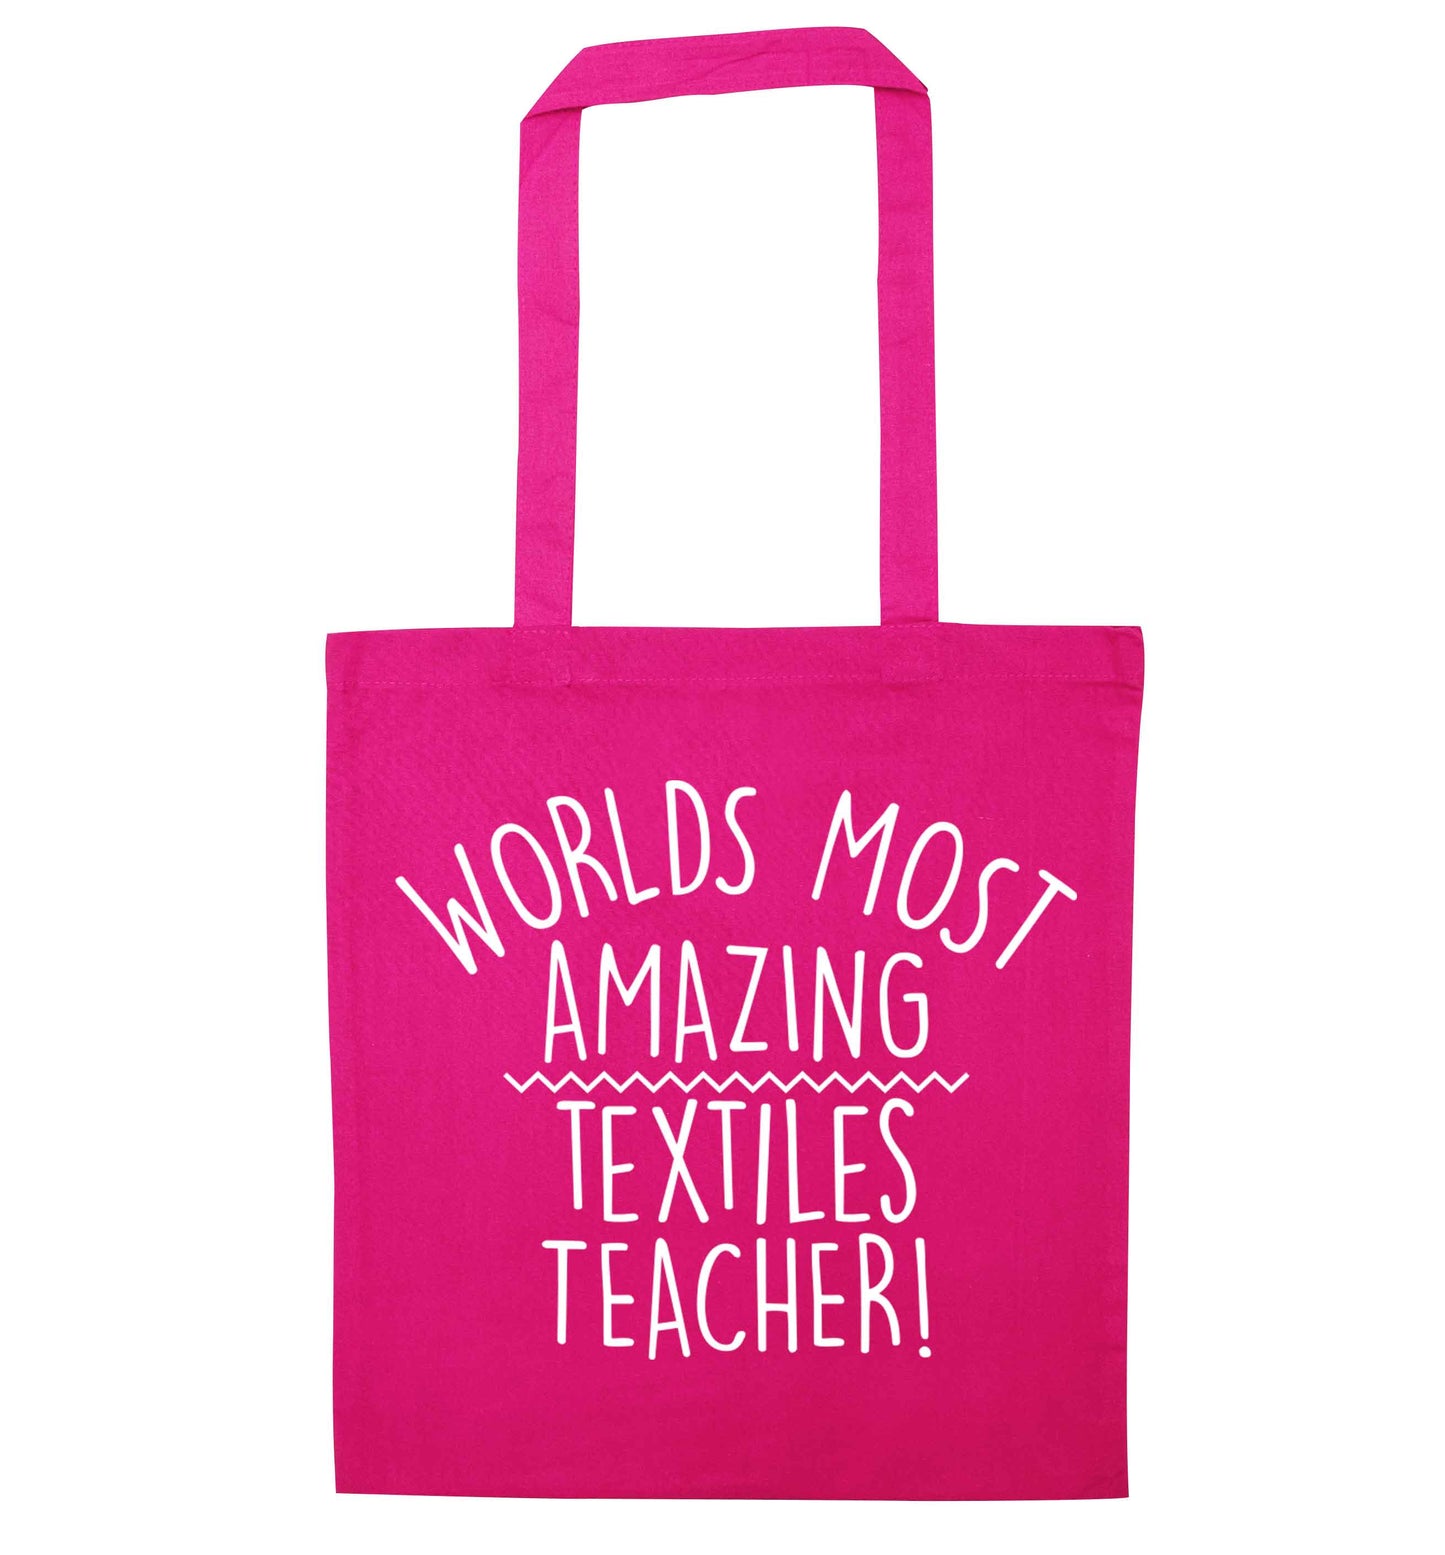 Worlds most amazing textiles teacher pink tote bag